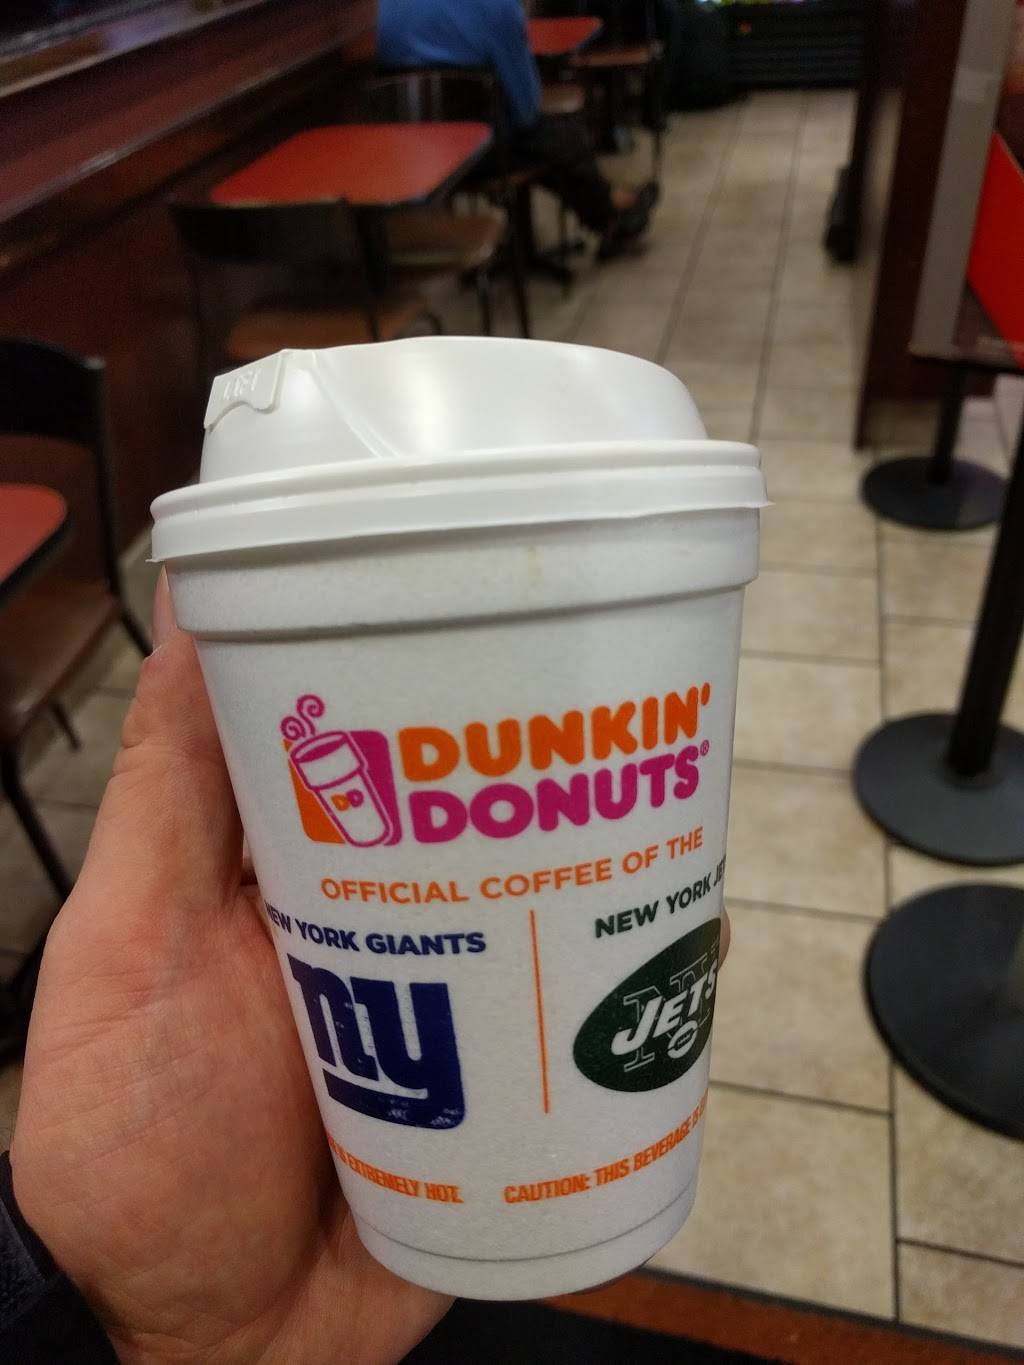 Dunkin Donuts | cafe | 1351 Paterson Plank Rd, Secaucus, NJ 07094, USA | 2016055555 OR +1 201-605-5555